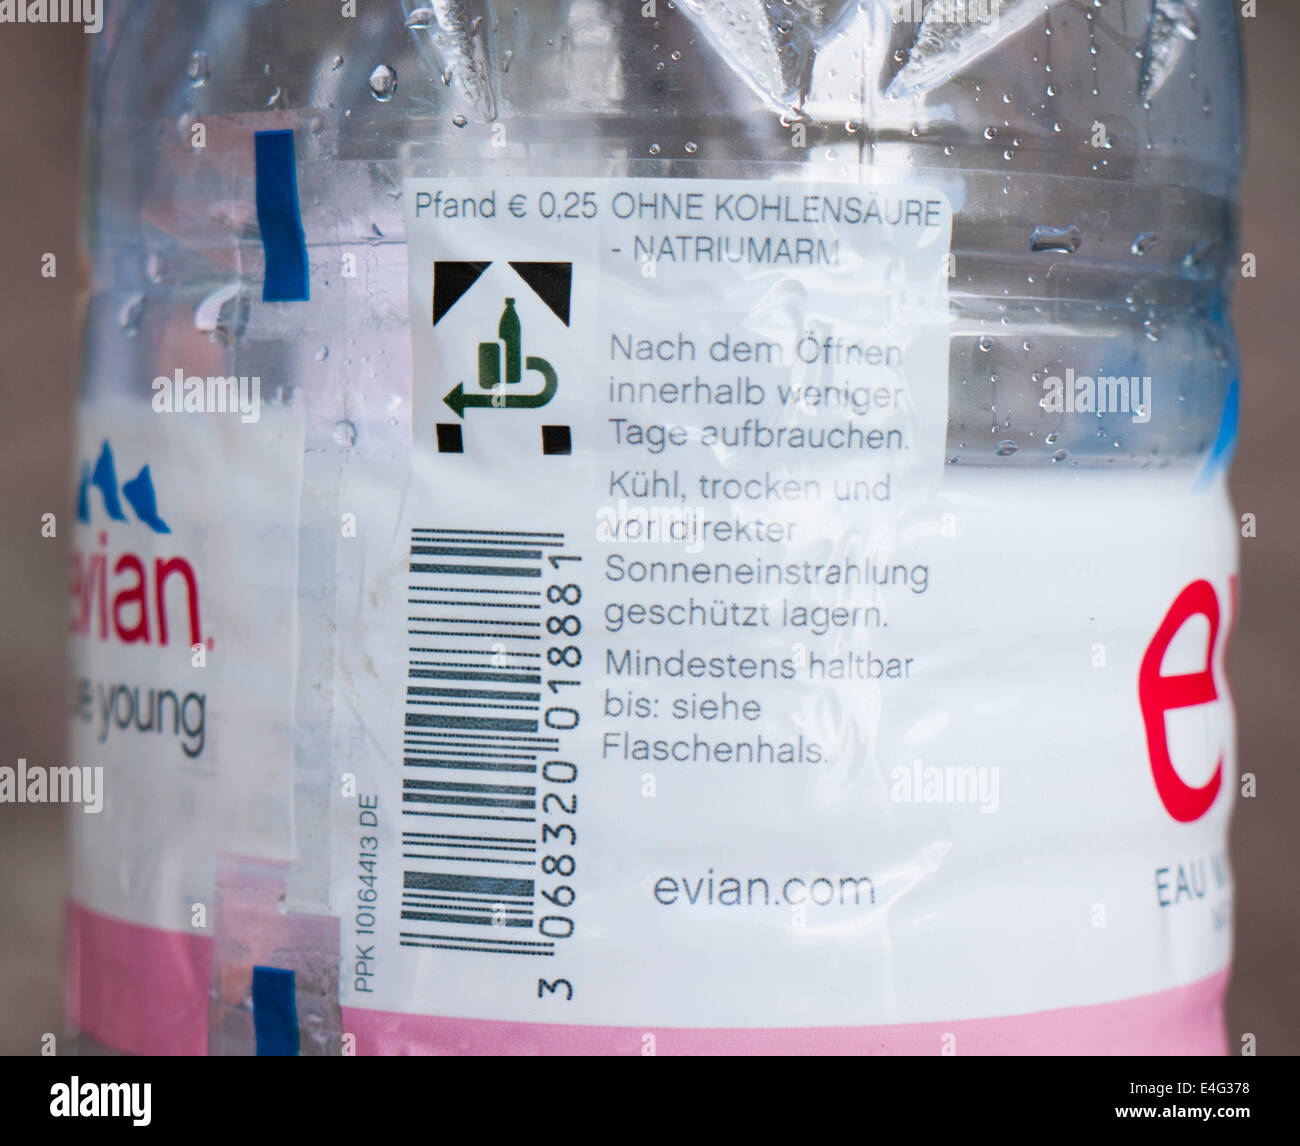 Pfand or deposit on return of a plastic water bottle in Germany Stock Photo  - Alamy